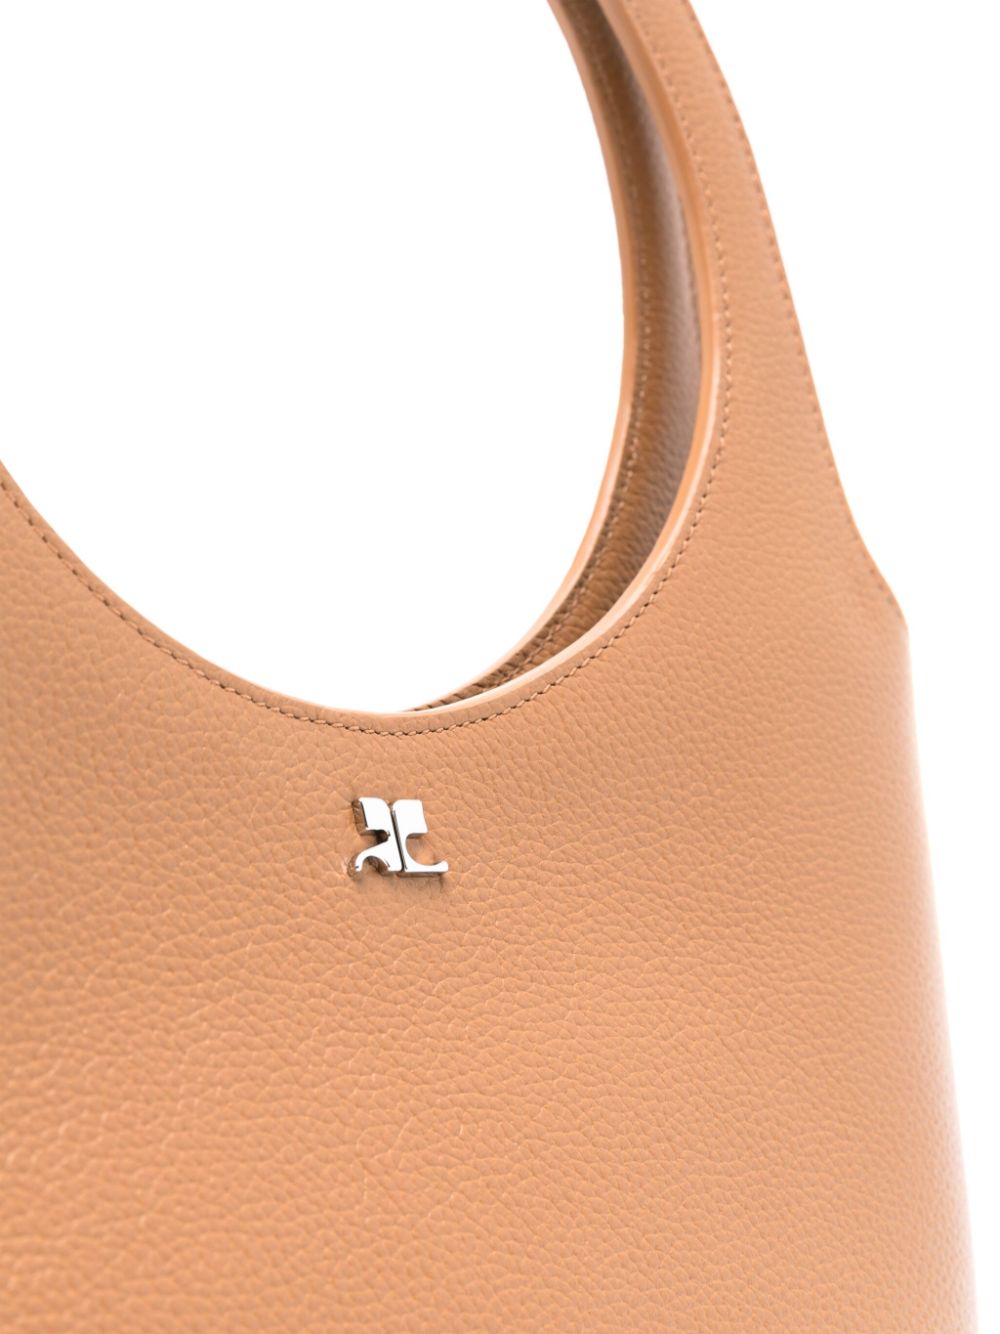 Holy leather tote bag<BR/><BR/>